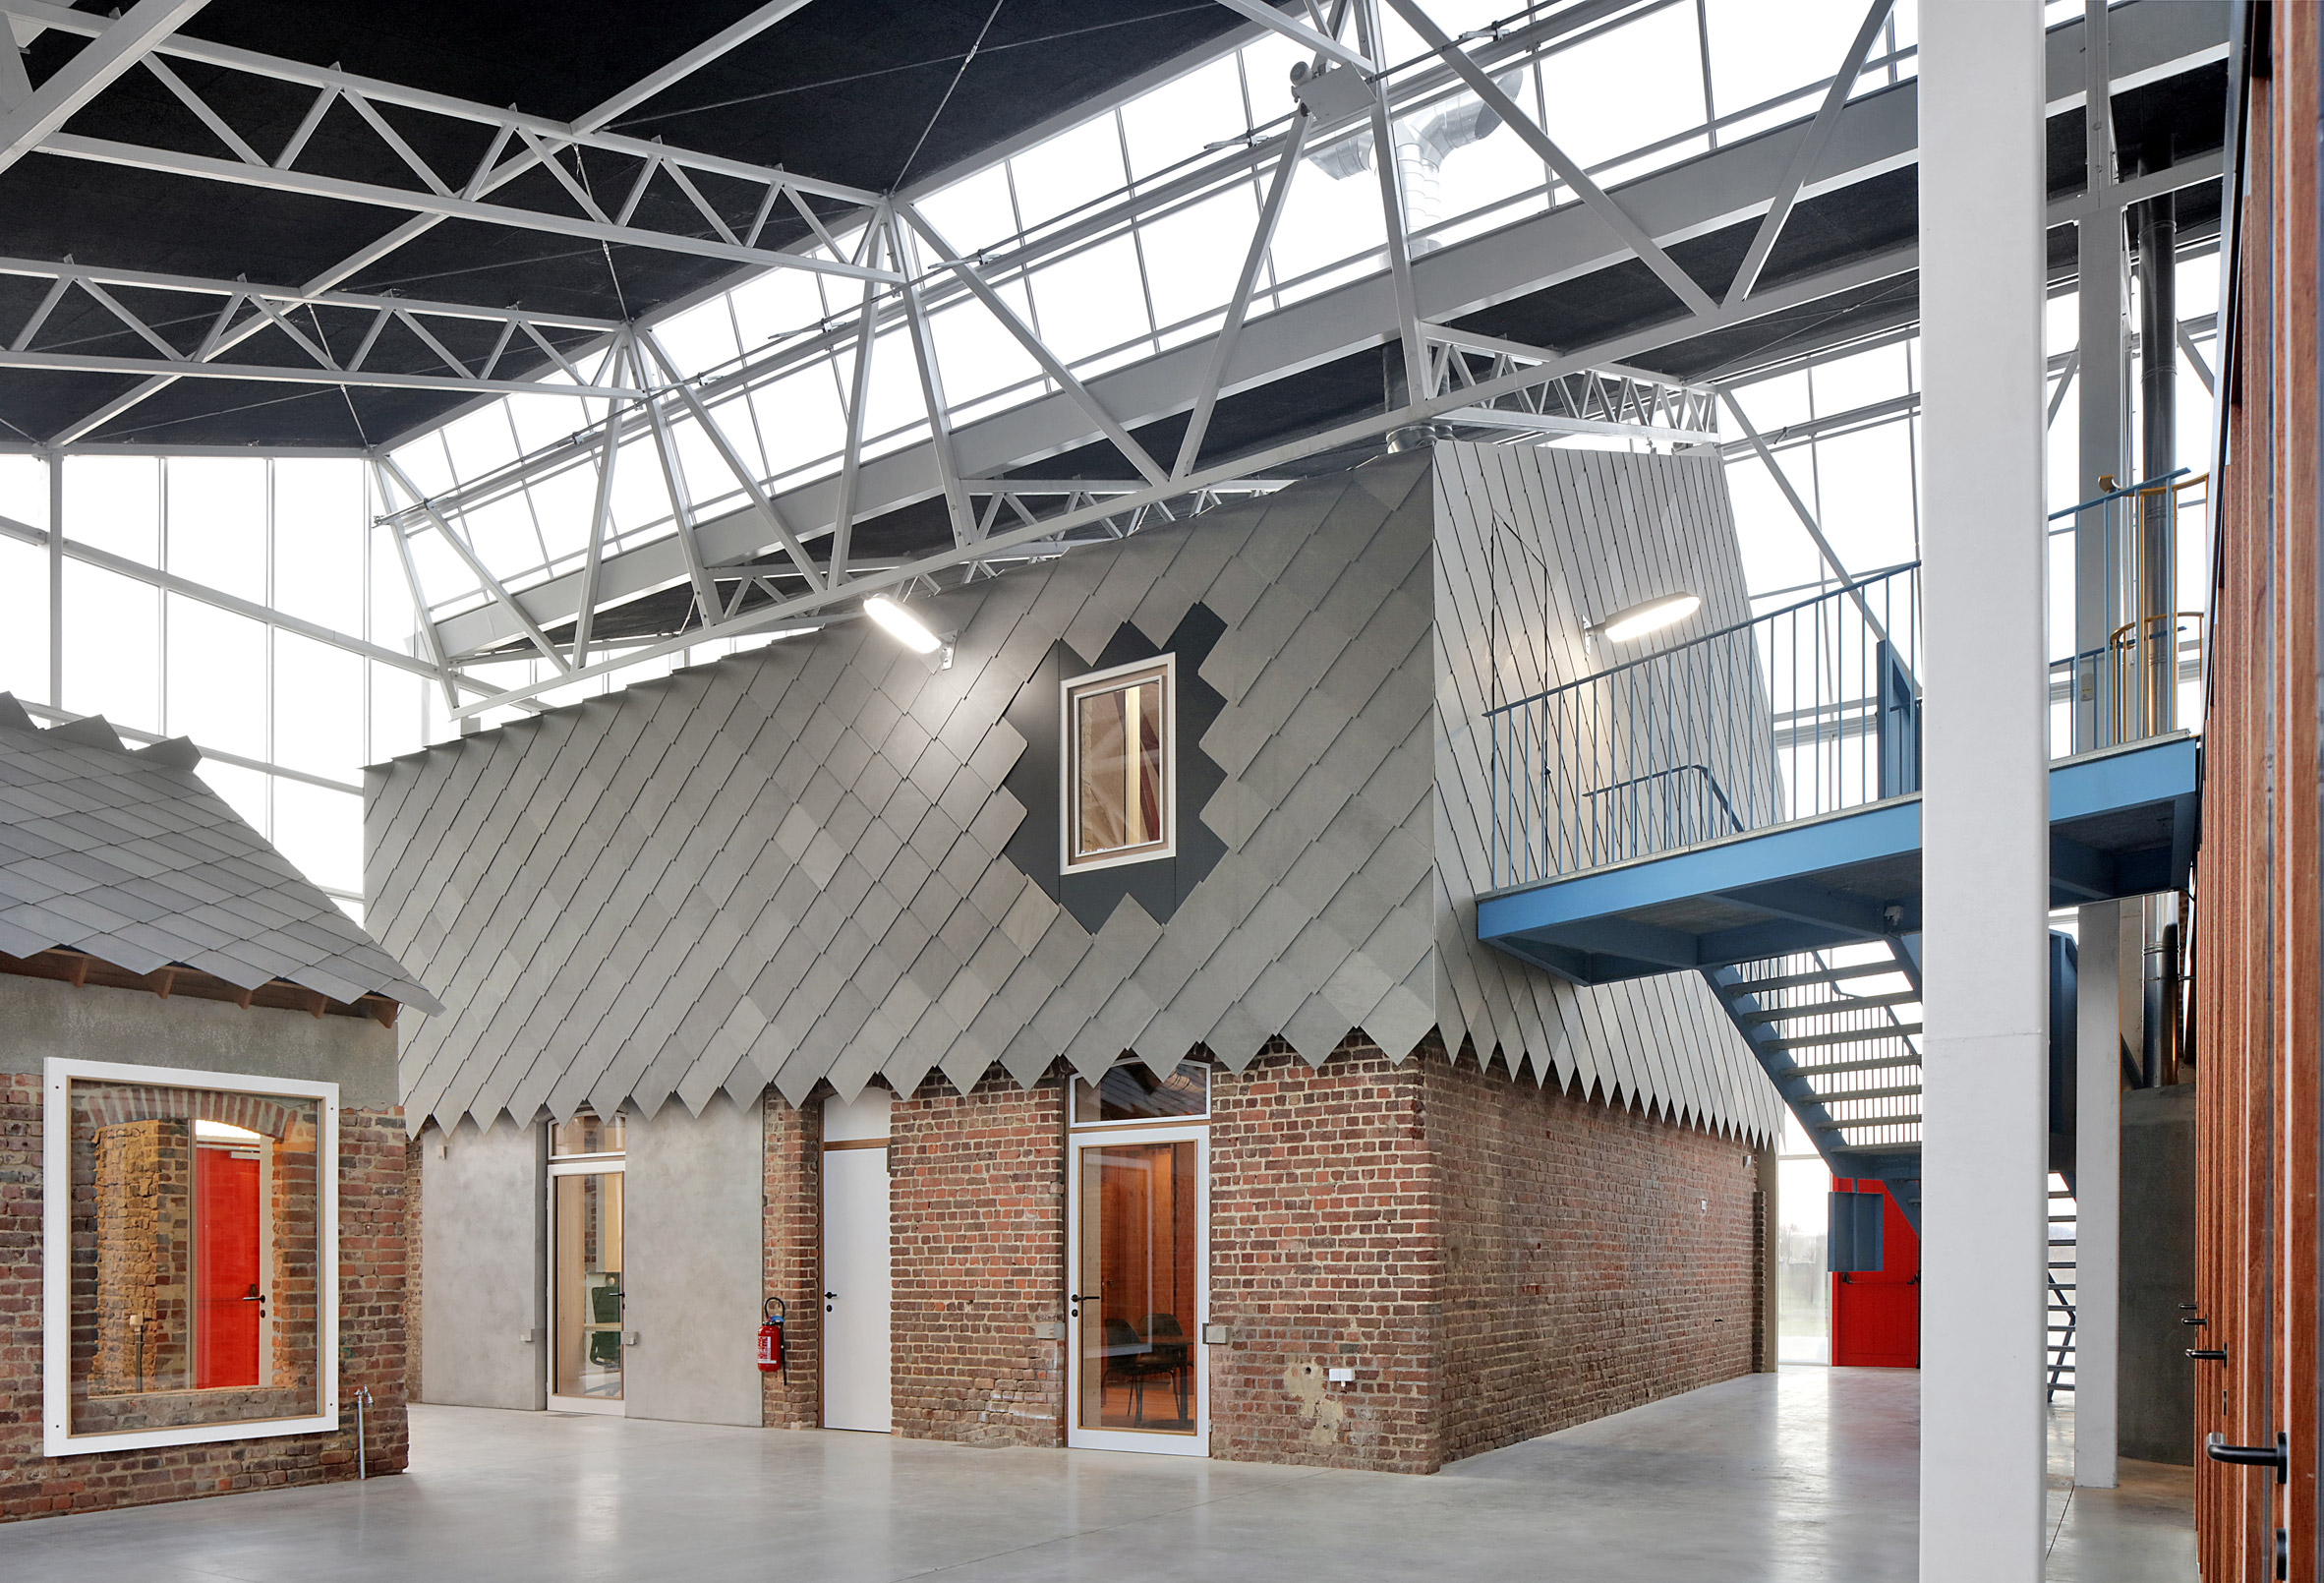 A refurbished agricultural building in Belgium